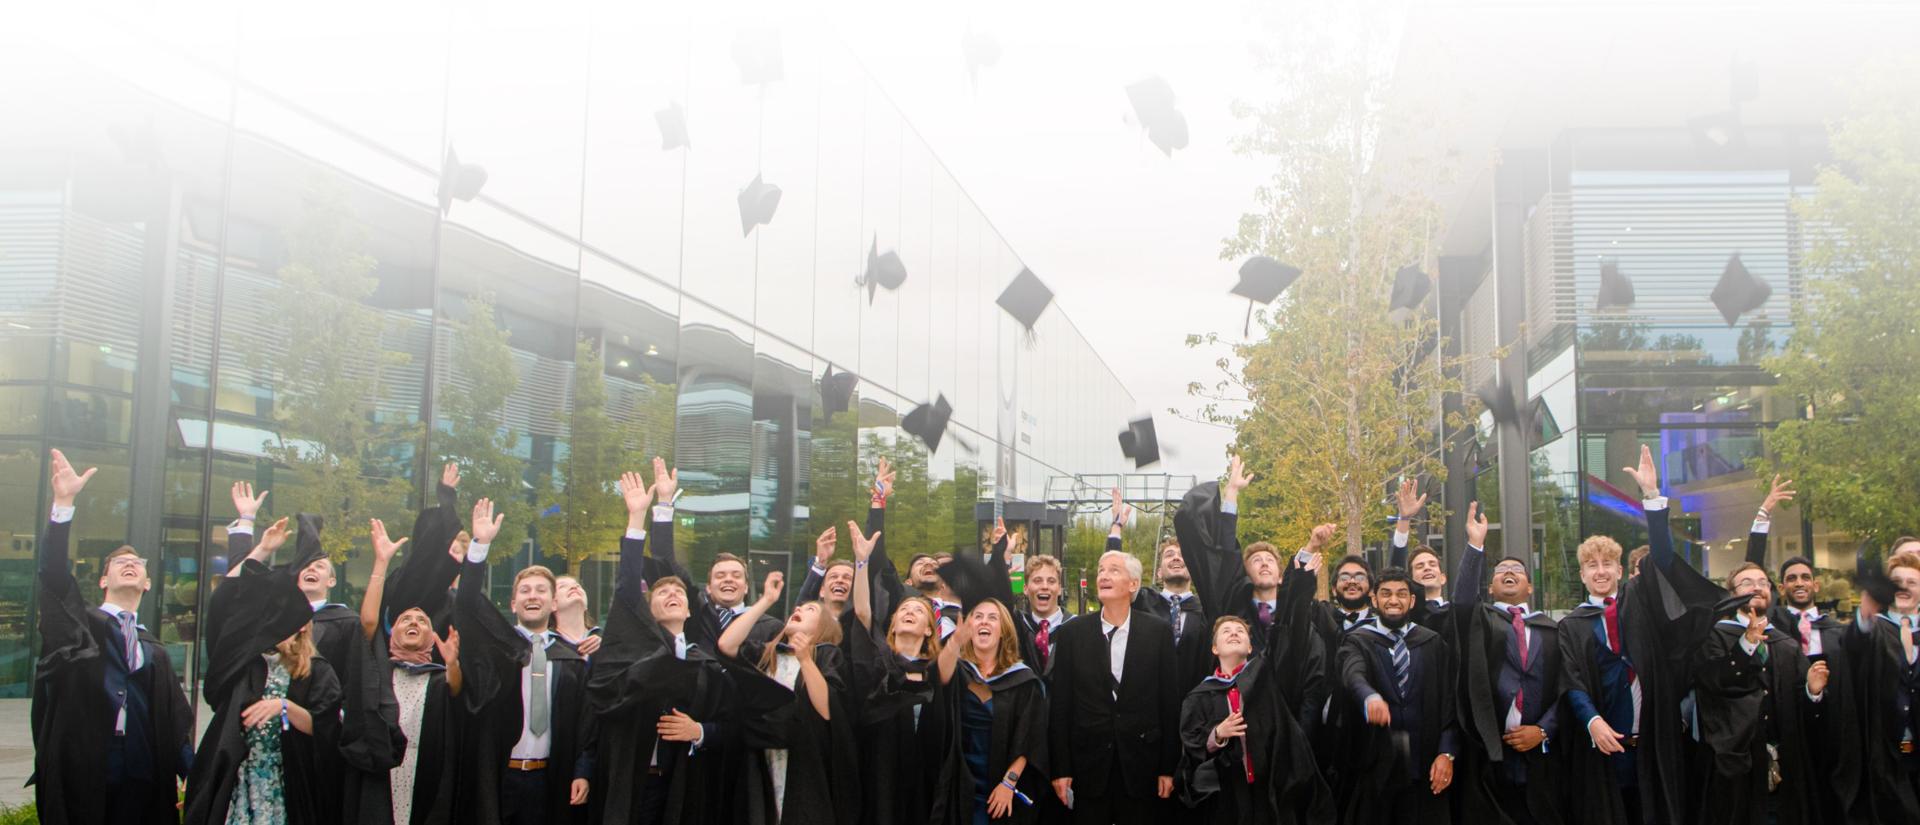 Dyson students throwing mortar boards on the Dyson Malmesbury campus